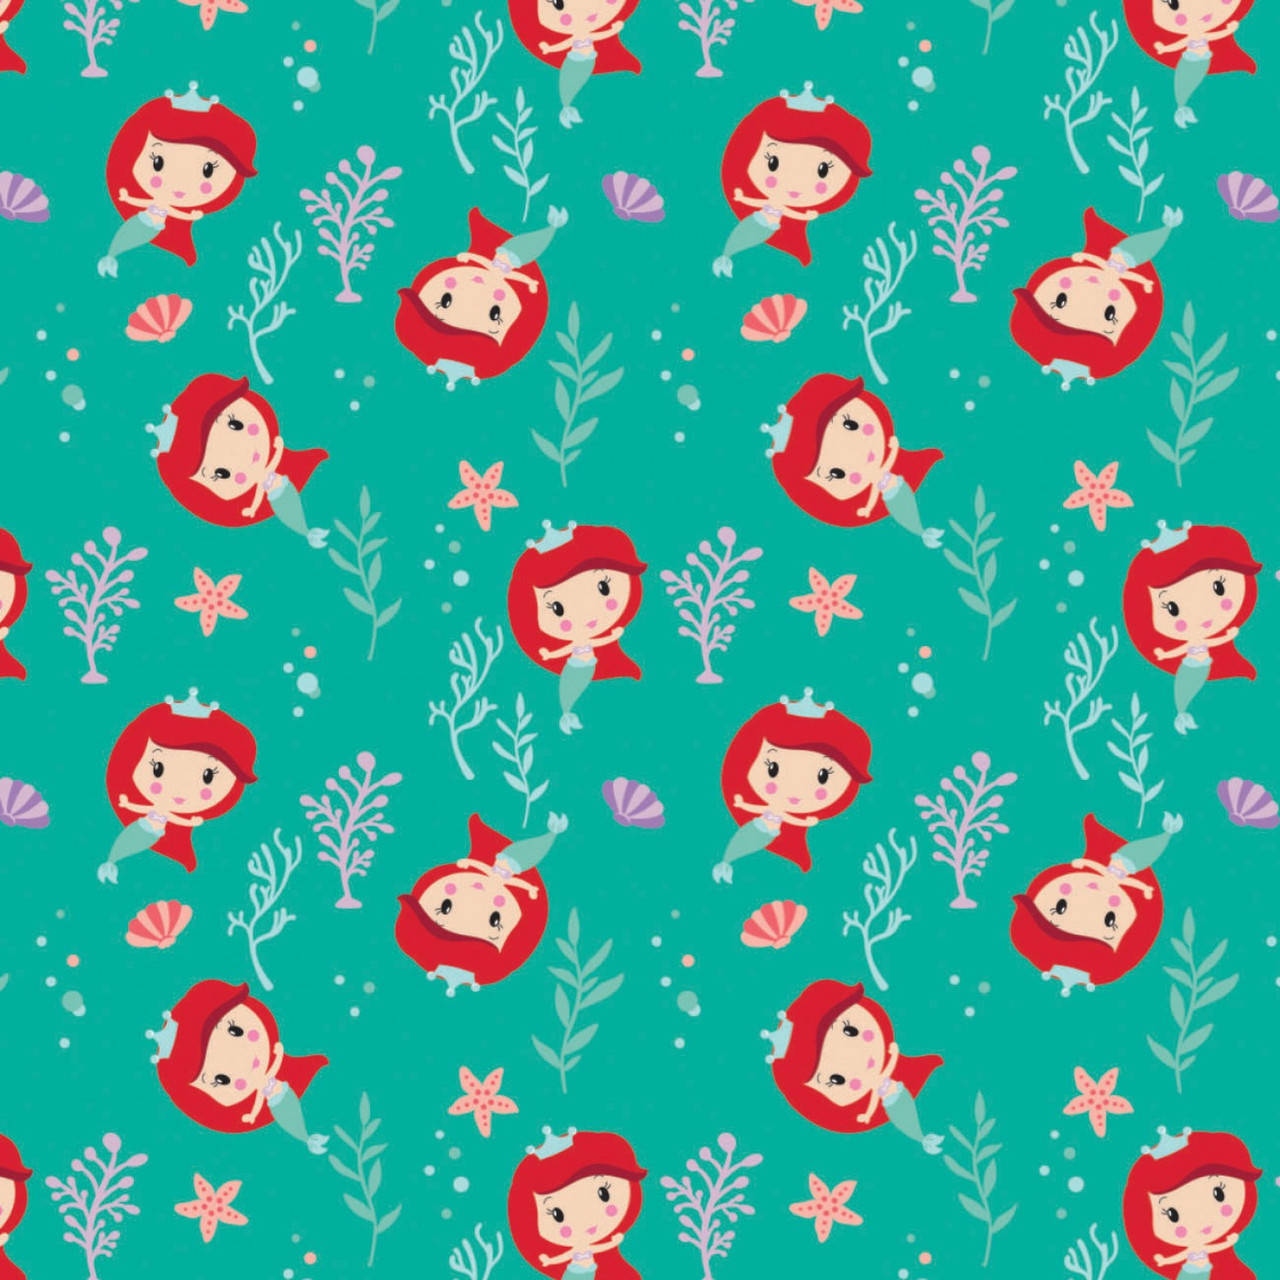 Brighten Your Day with Colorful Disney Patterns Wallpaper